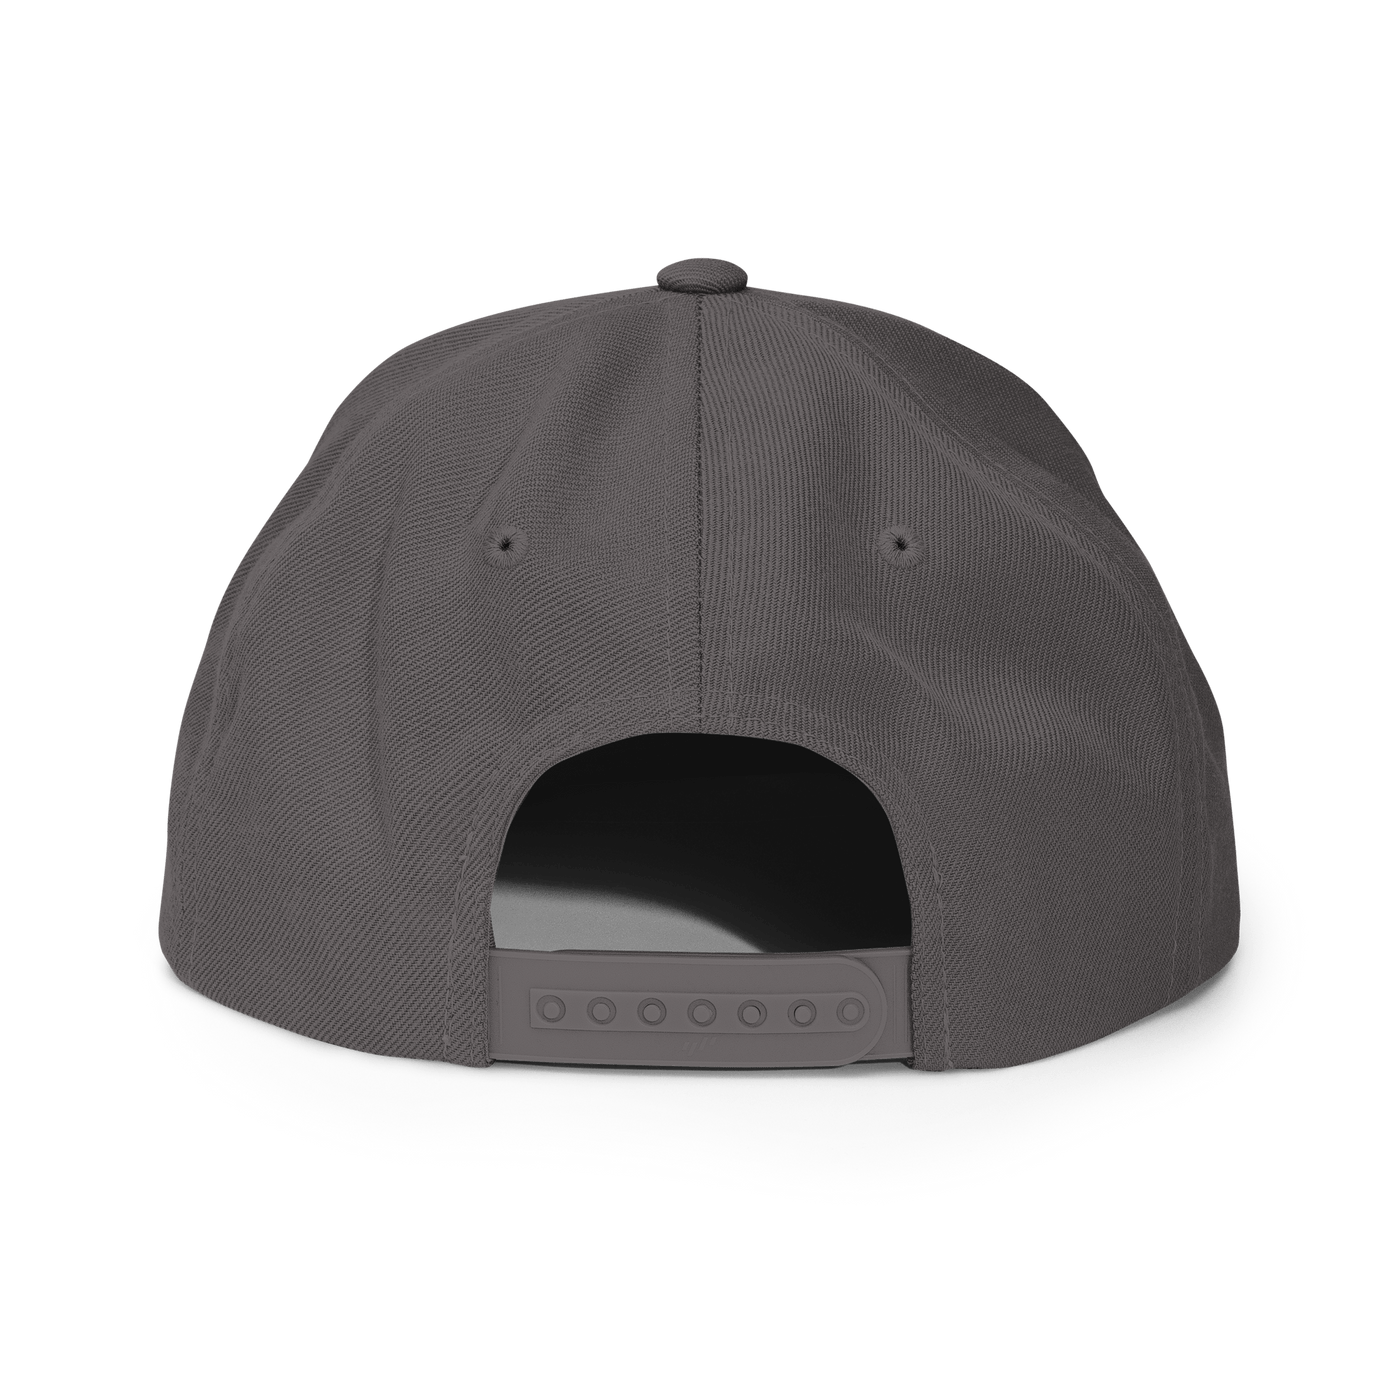 Fries Before Guys Snapback Hat - Dark Grey - - Just Another Cap Store